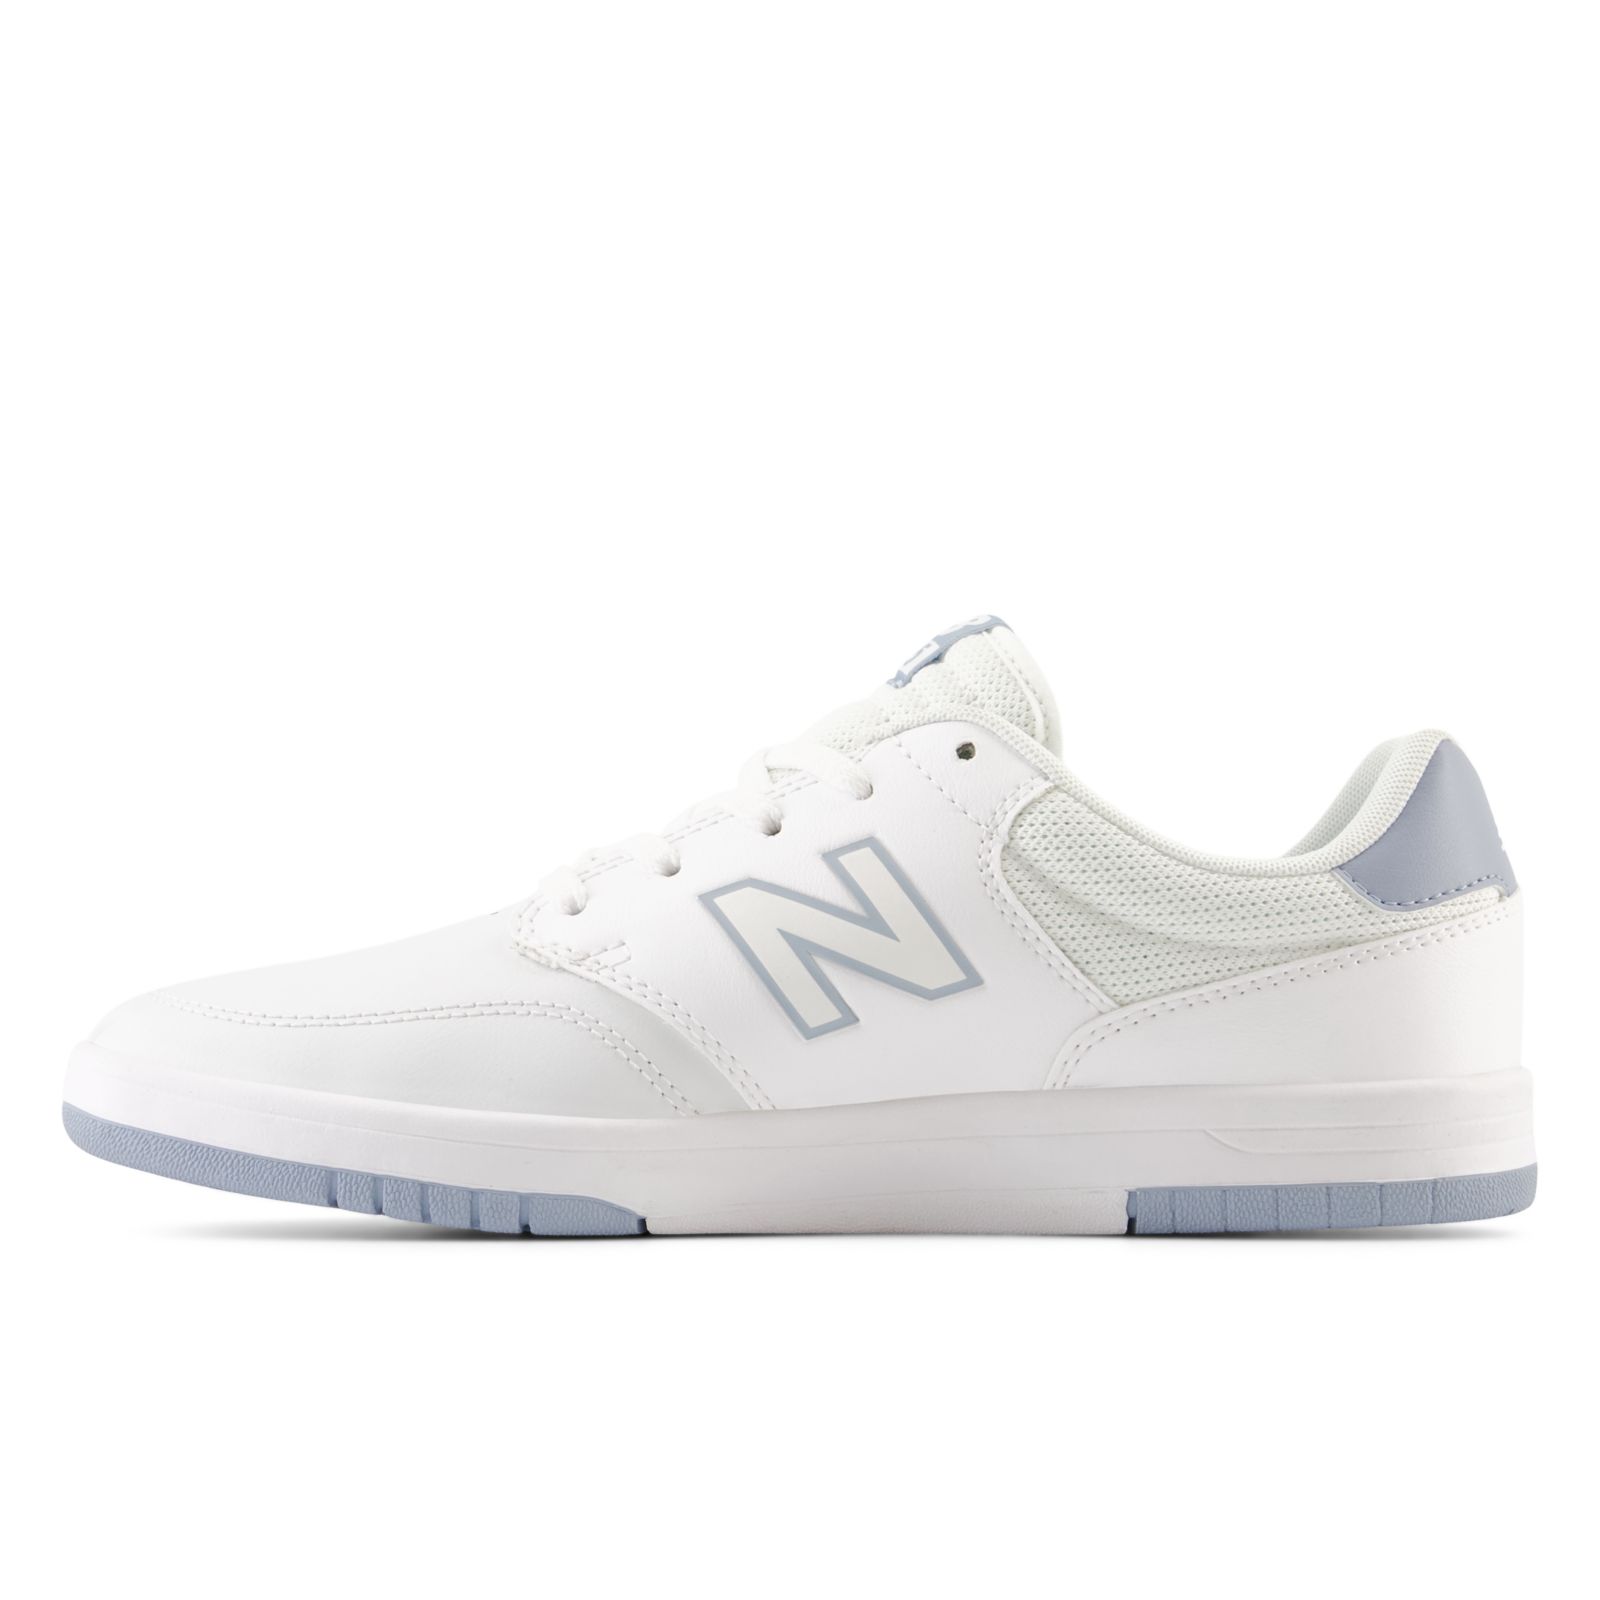 New Balance Numeric 425 Review: Is This the Ultimate Skate Shoe? You Wont Believe It!